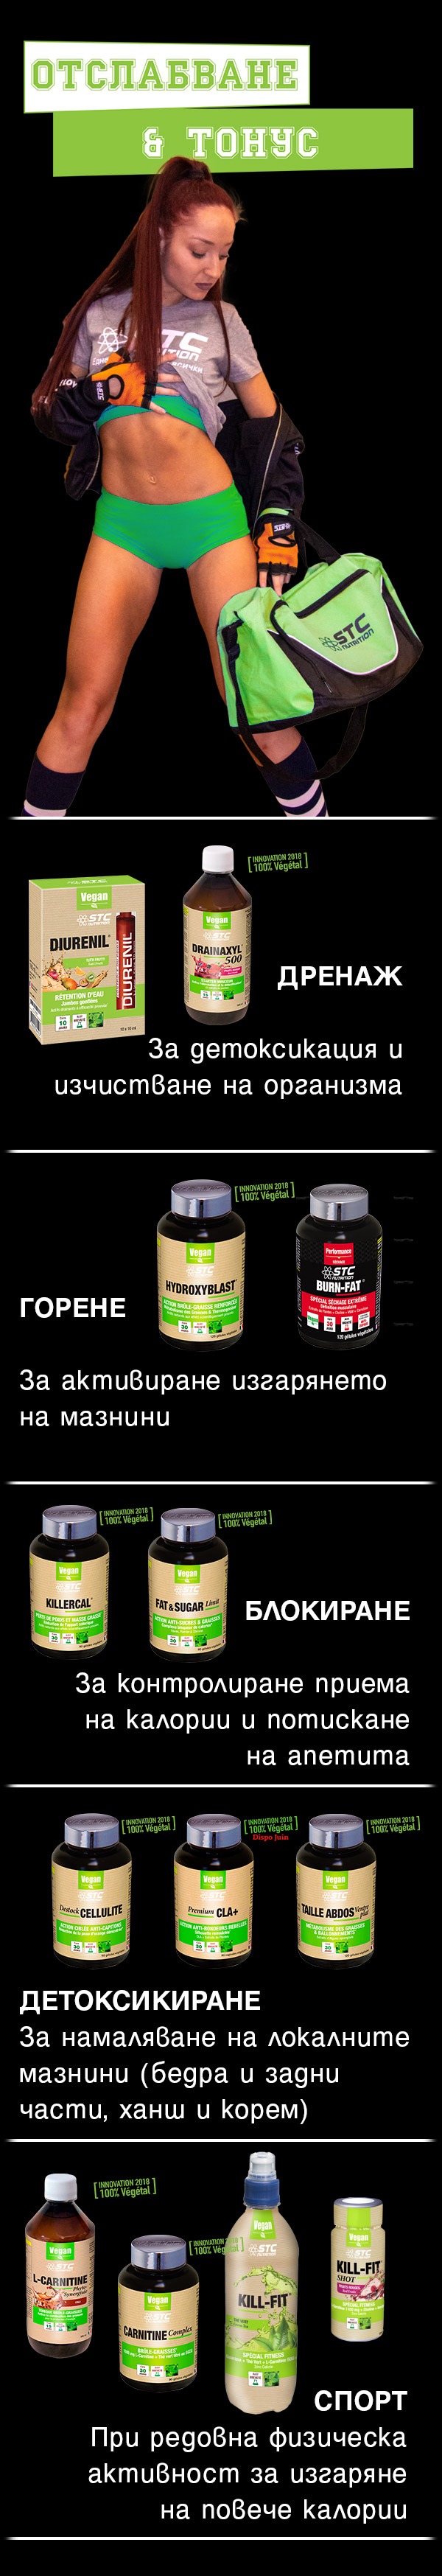 STC nutrition